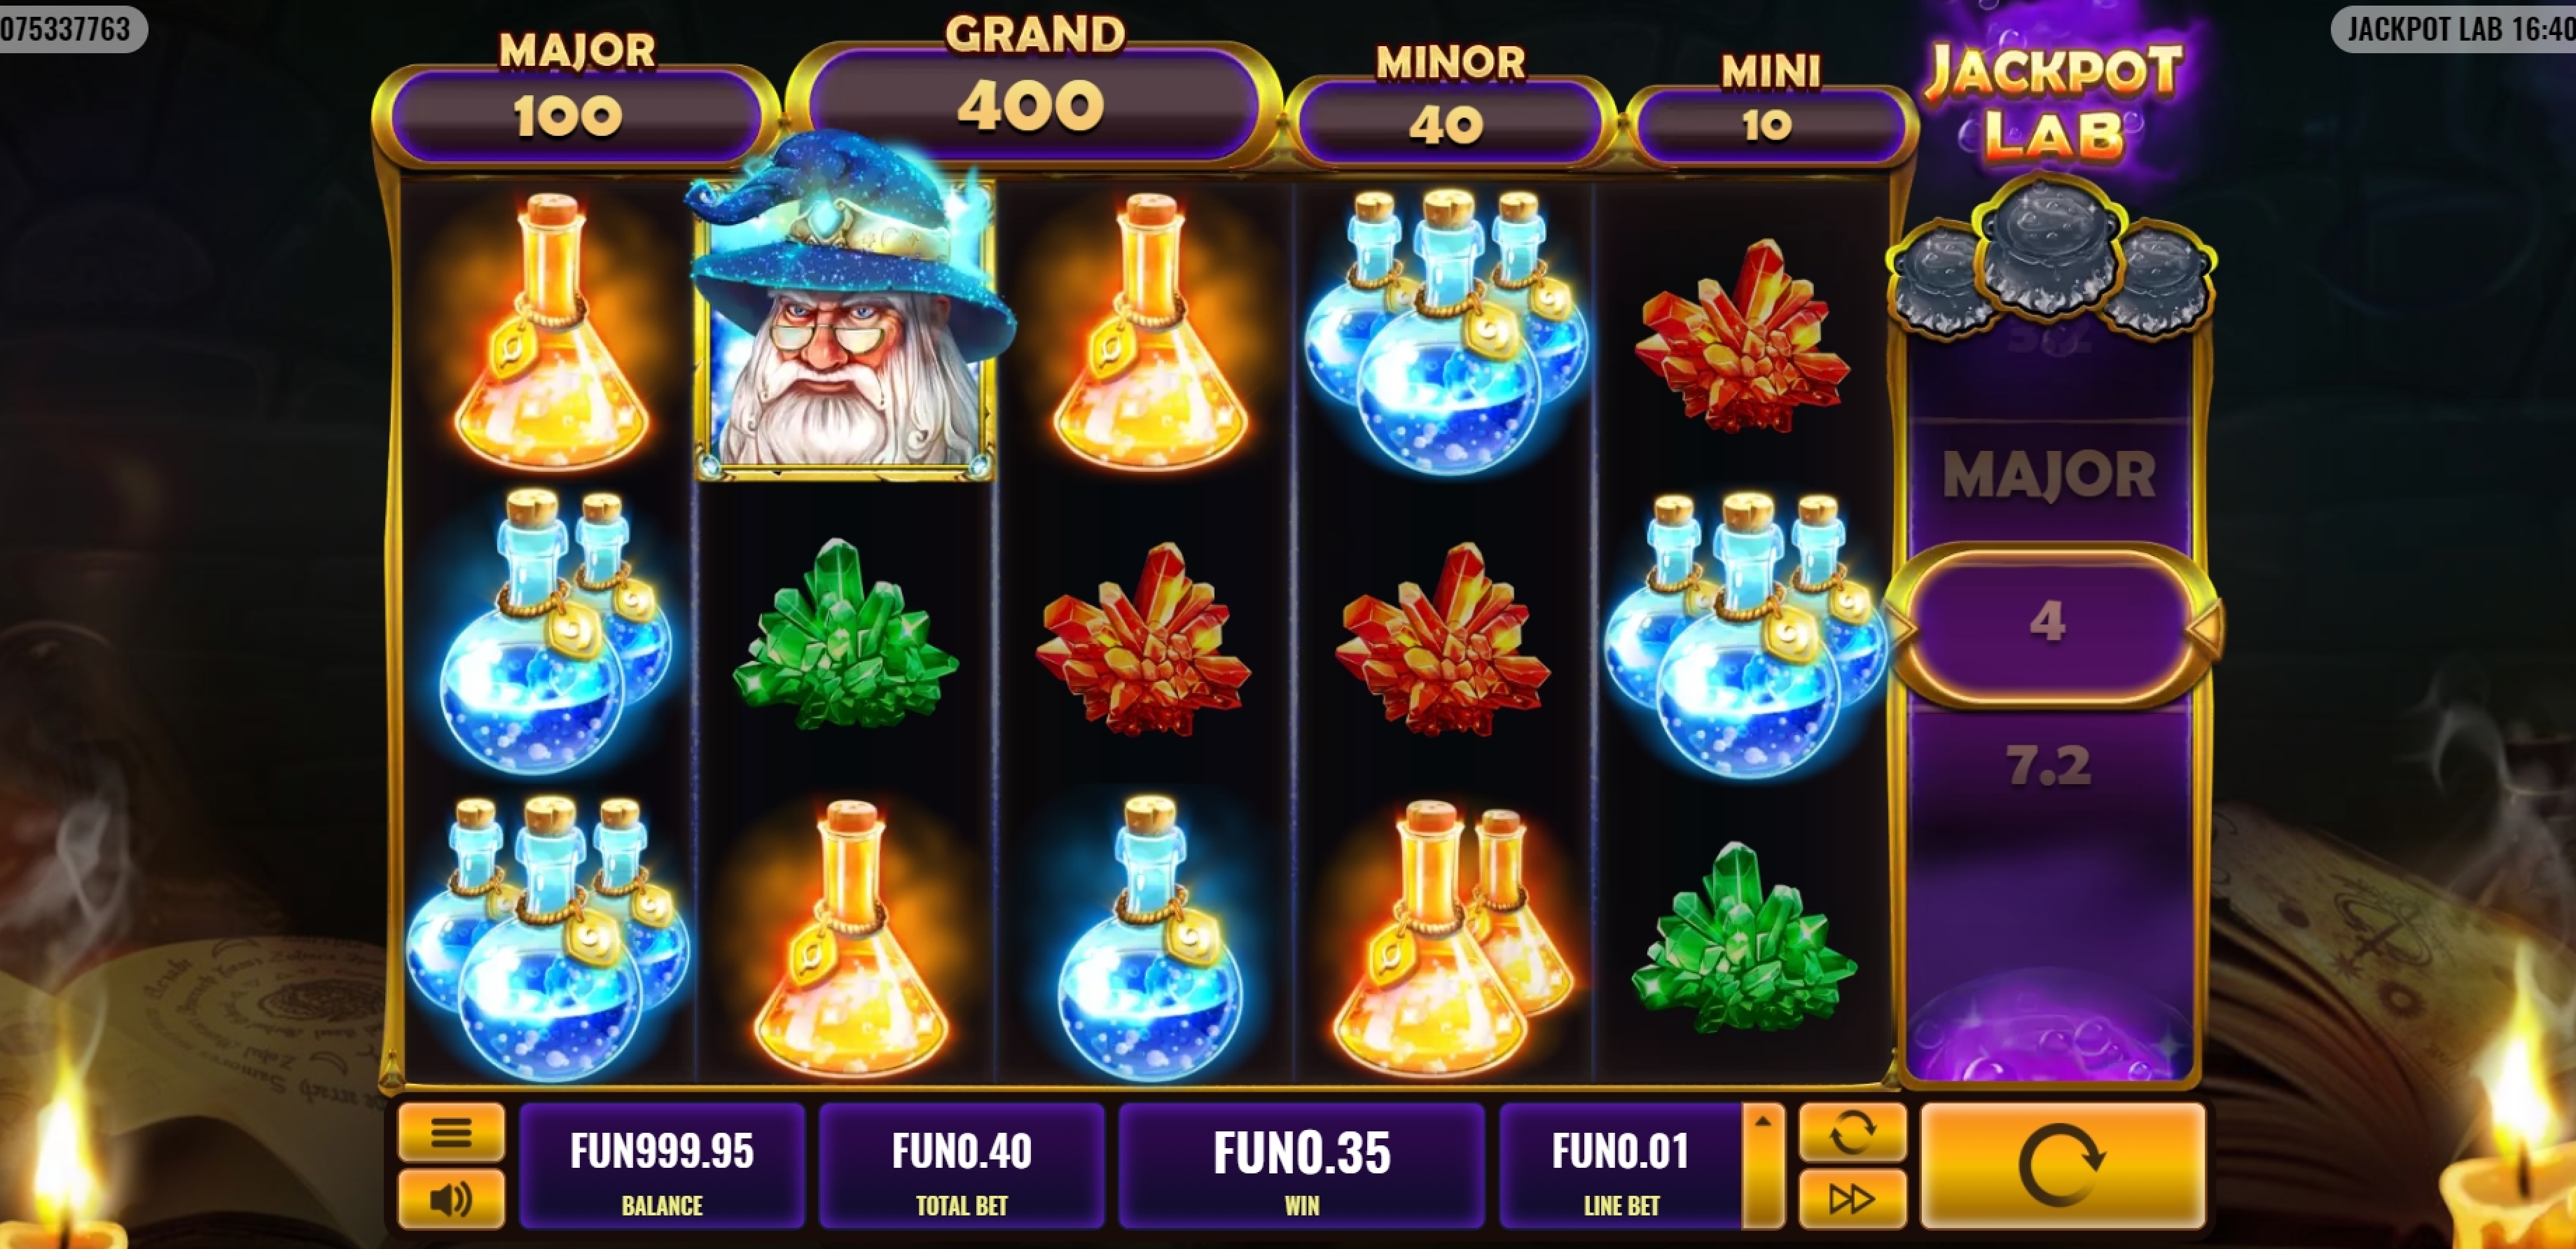 Win Money in Jackpot Lab Free Slot Game by Platipus